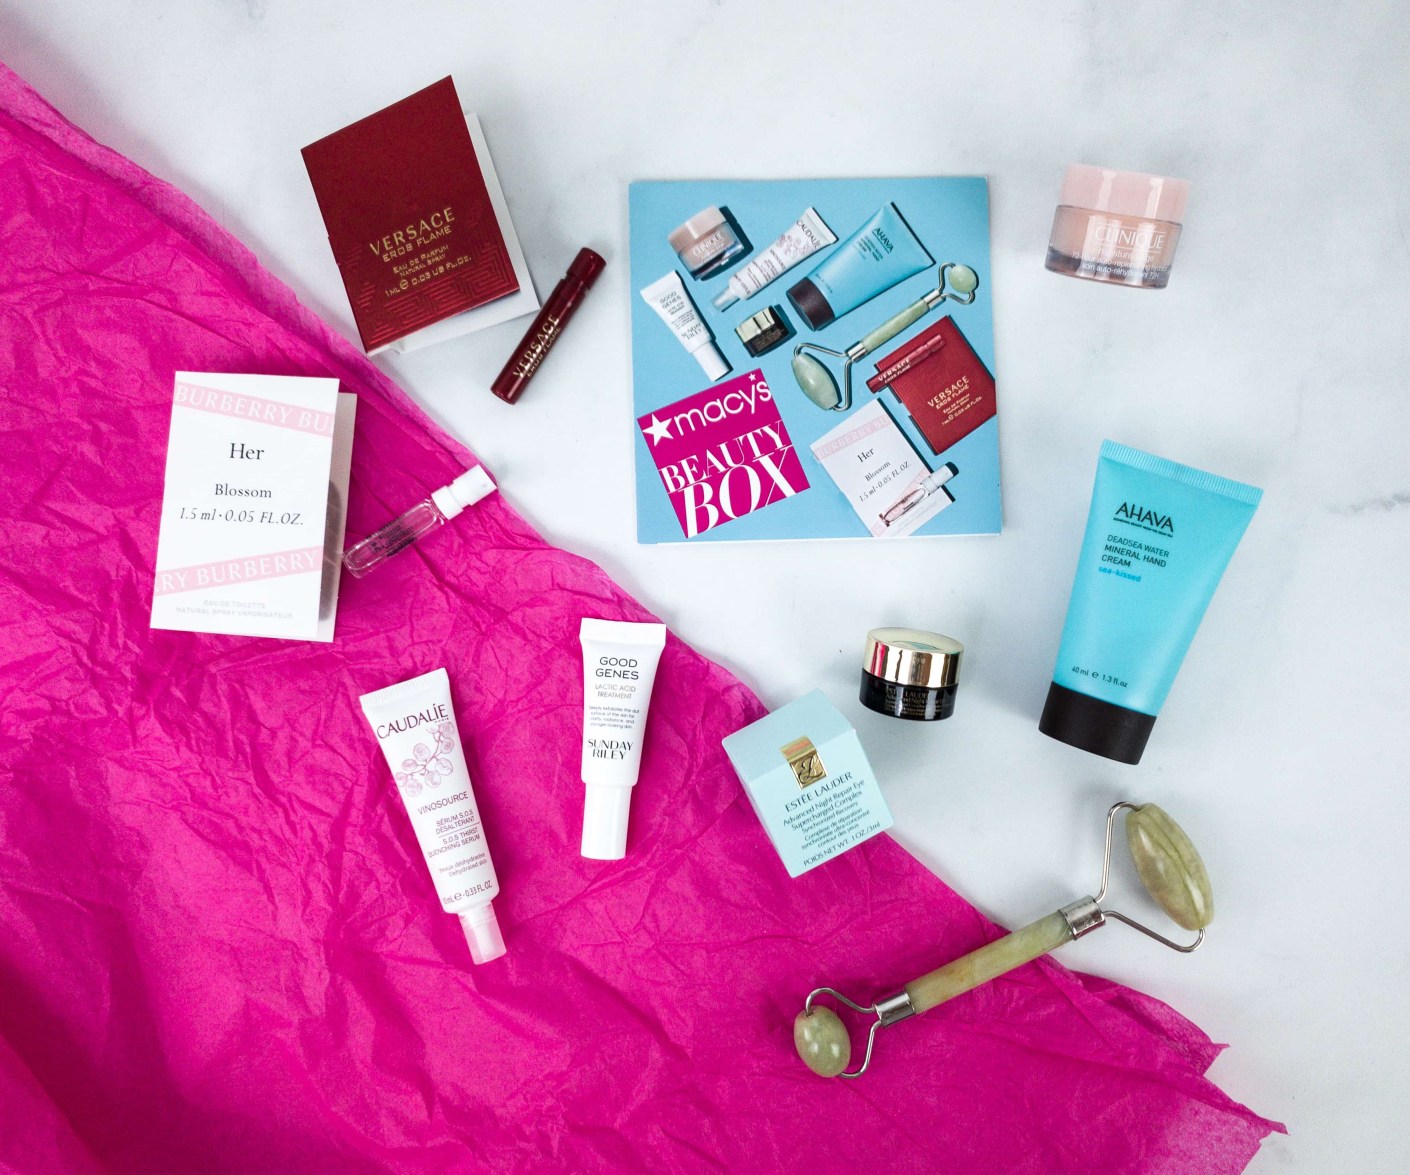 Macy's Beauty Box Reviews Get All The Details At Hello Subscription!